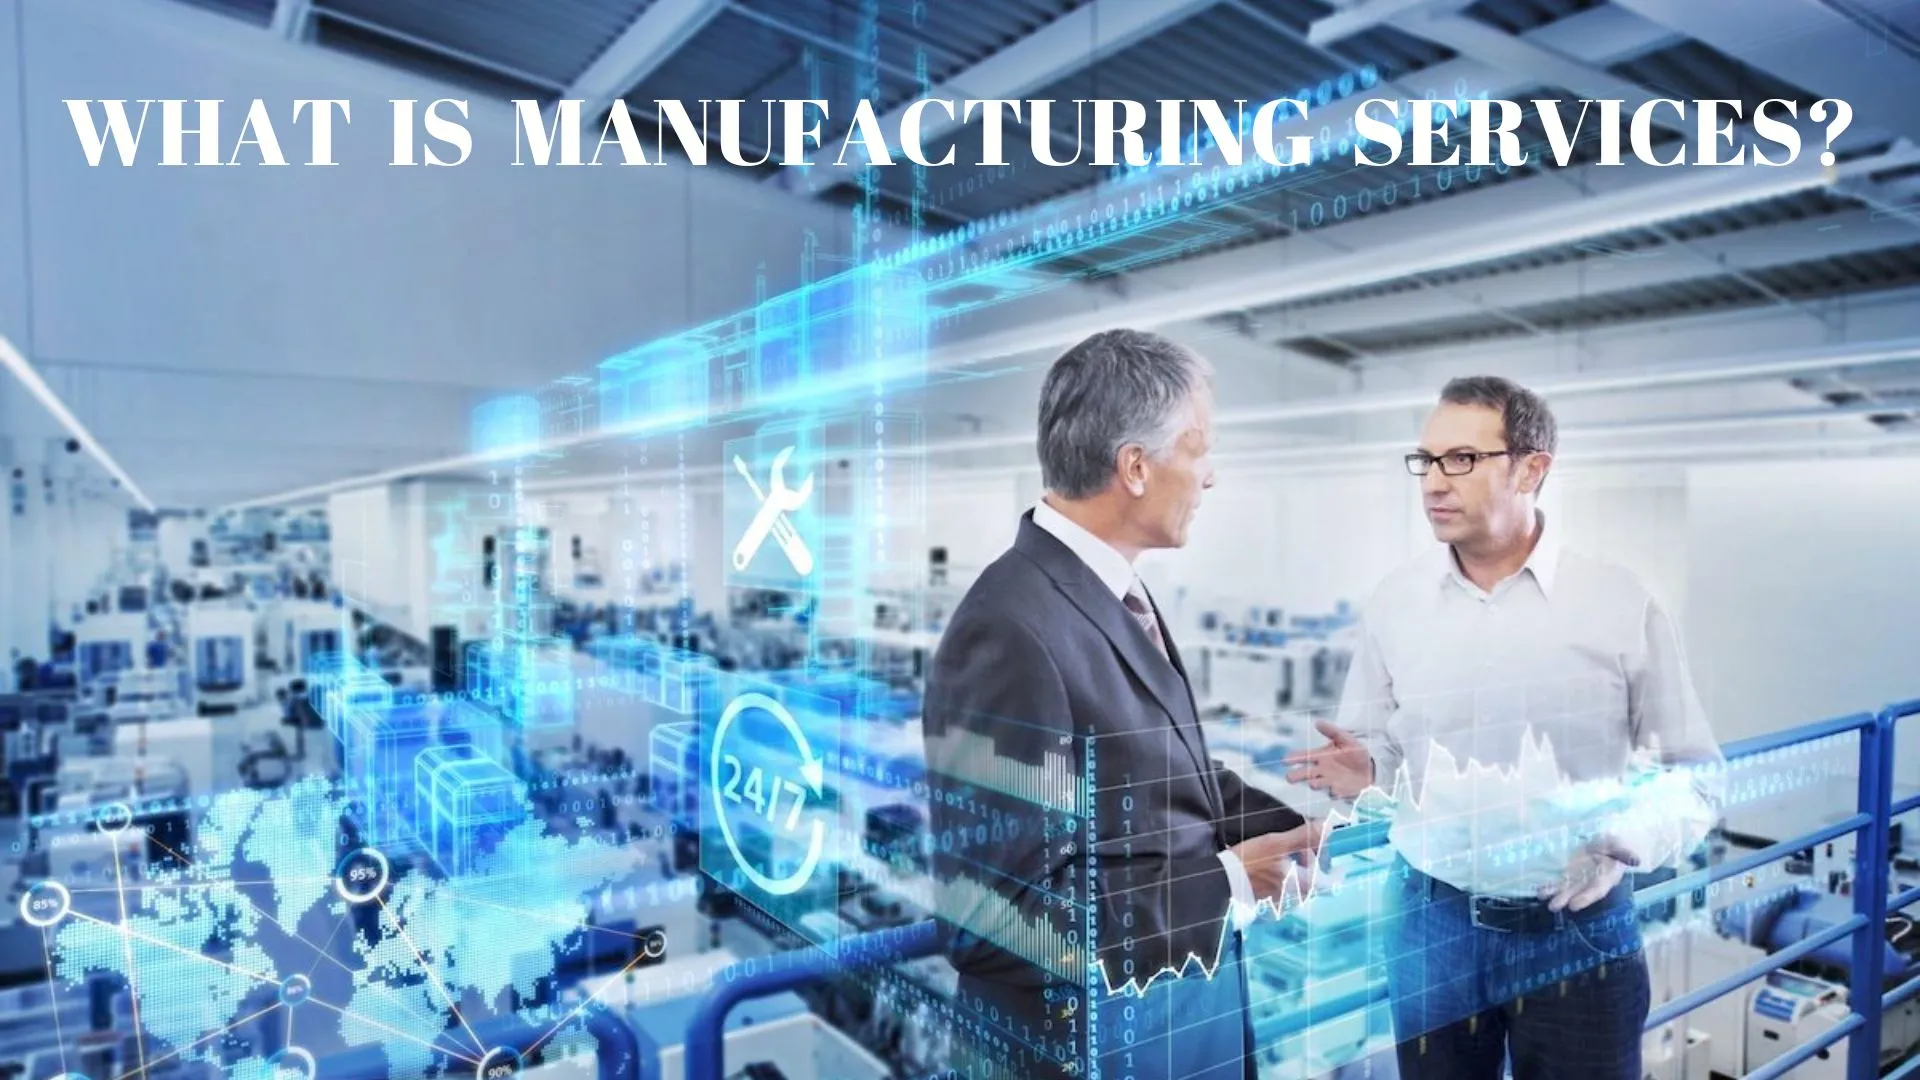 WHAT IS MANUFACTURING SERVICES